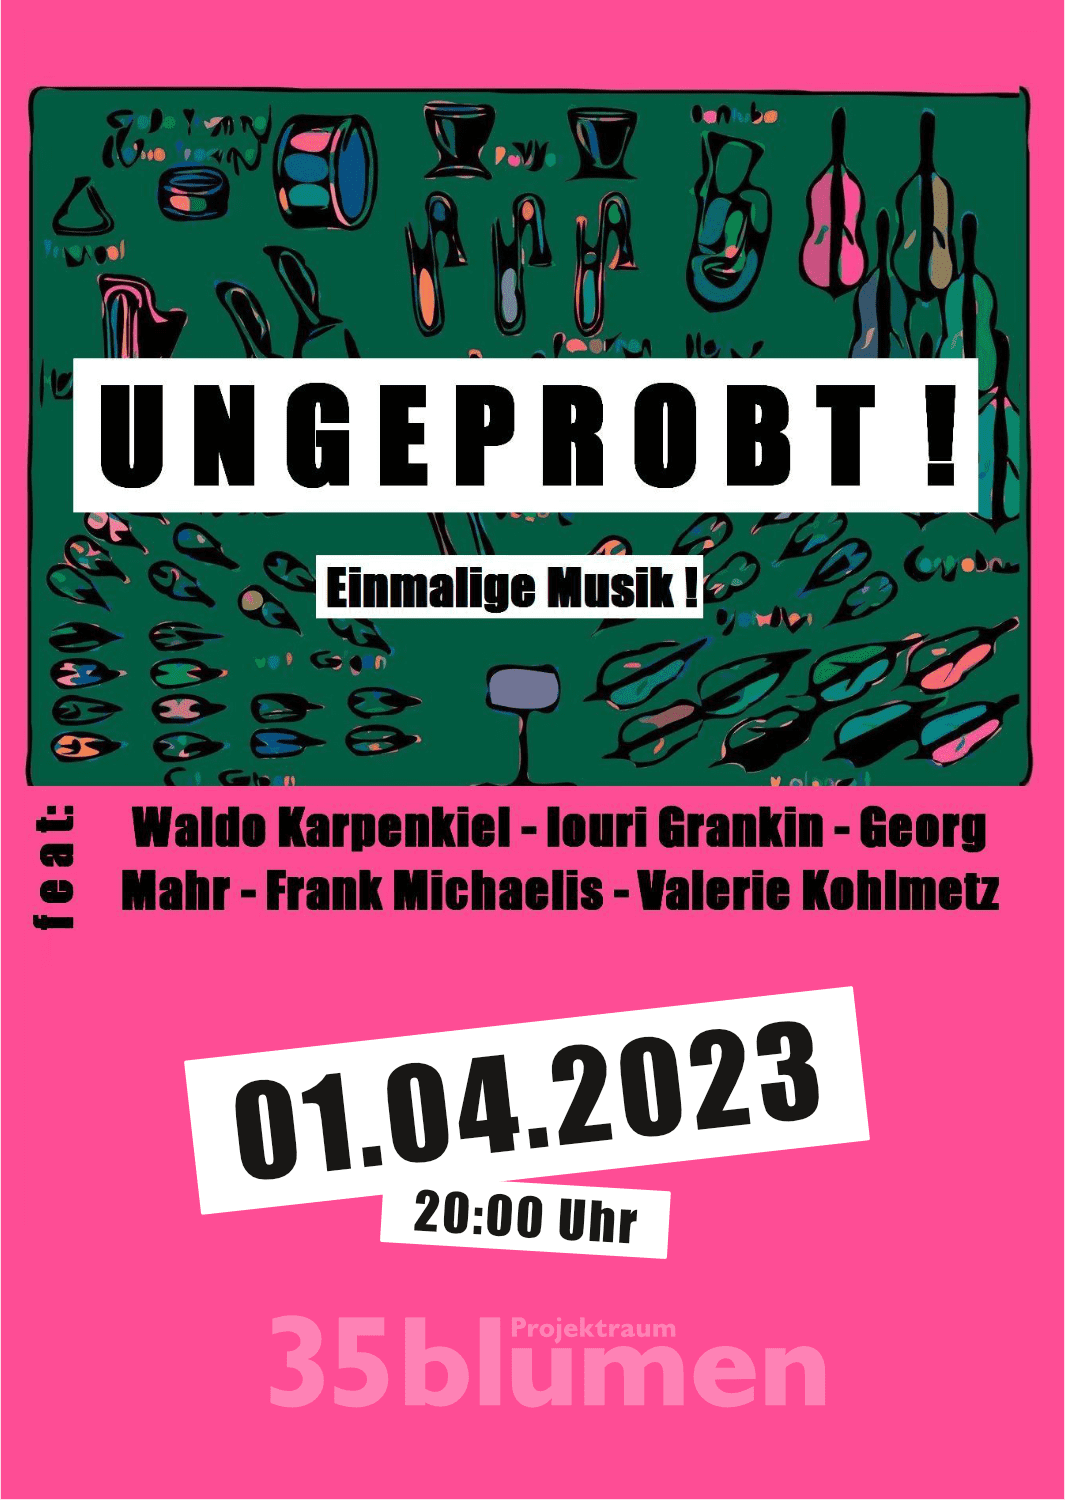 You are currently viewing 35blumenmusik – “Ungeprobt!”